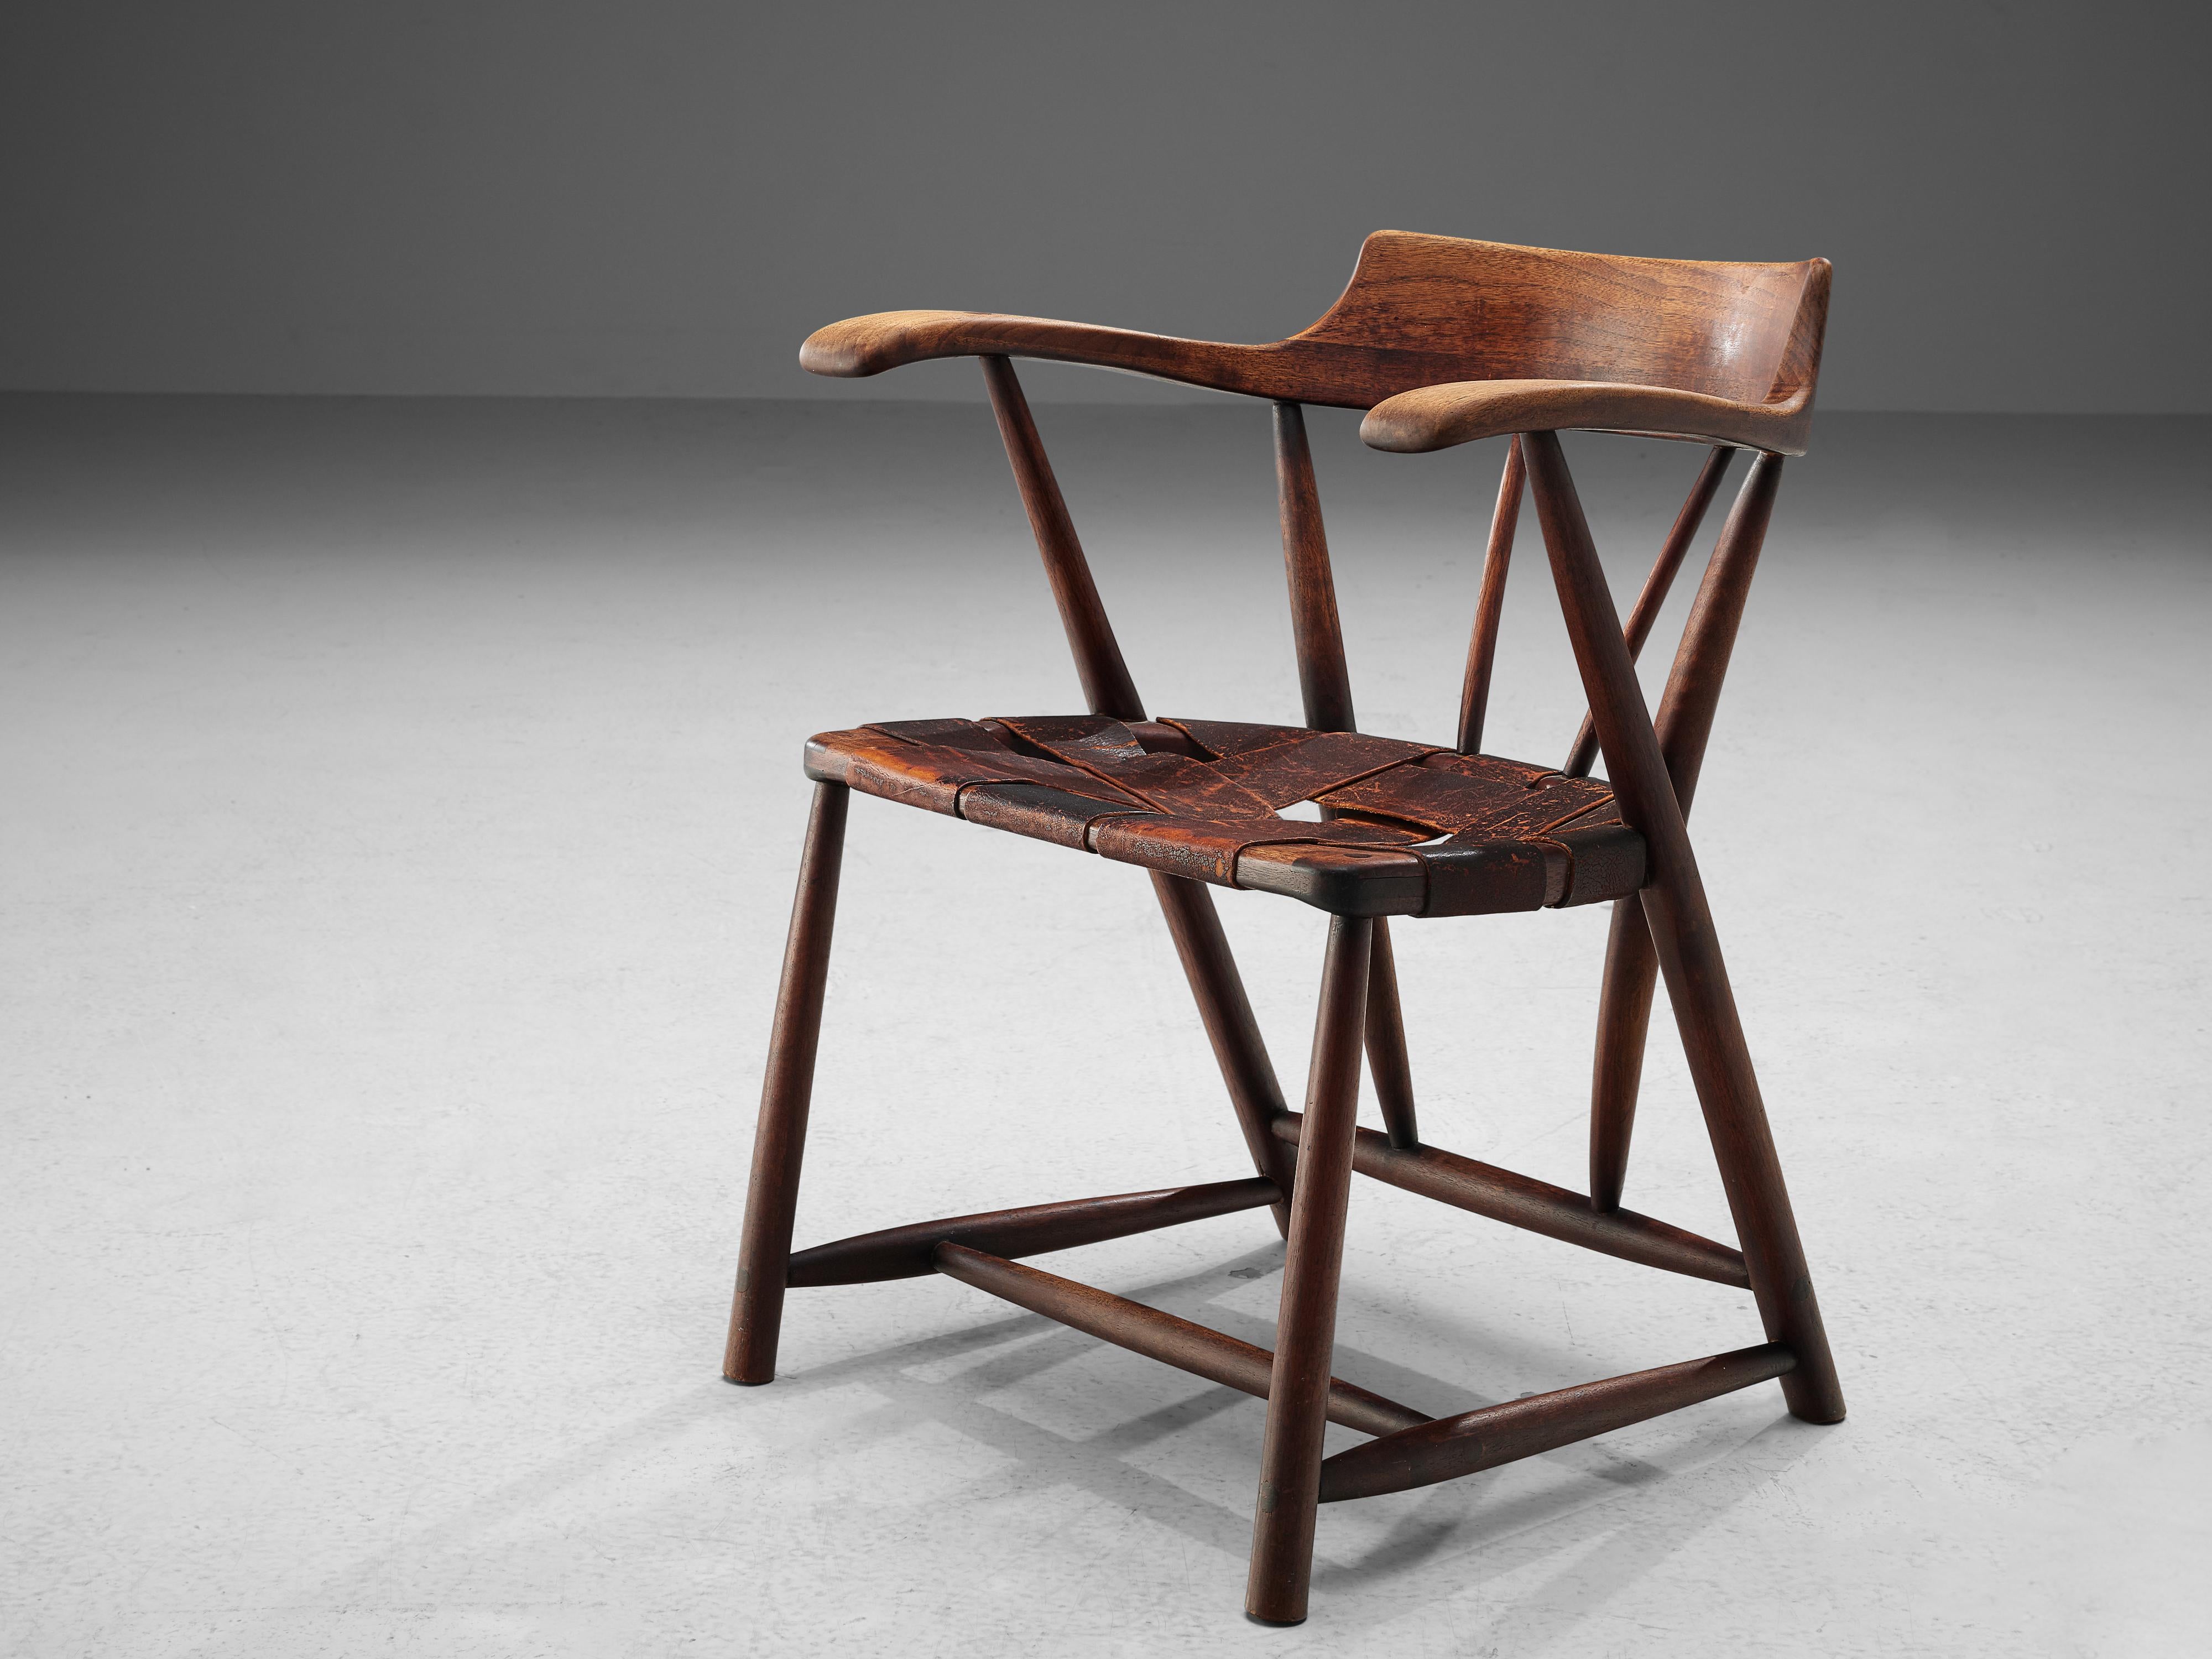 Early Wharton Esherick ‘Captain’s Chairs’ in American Walnut and Leather 1